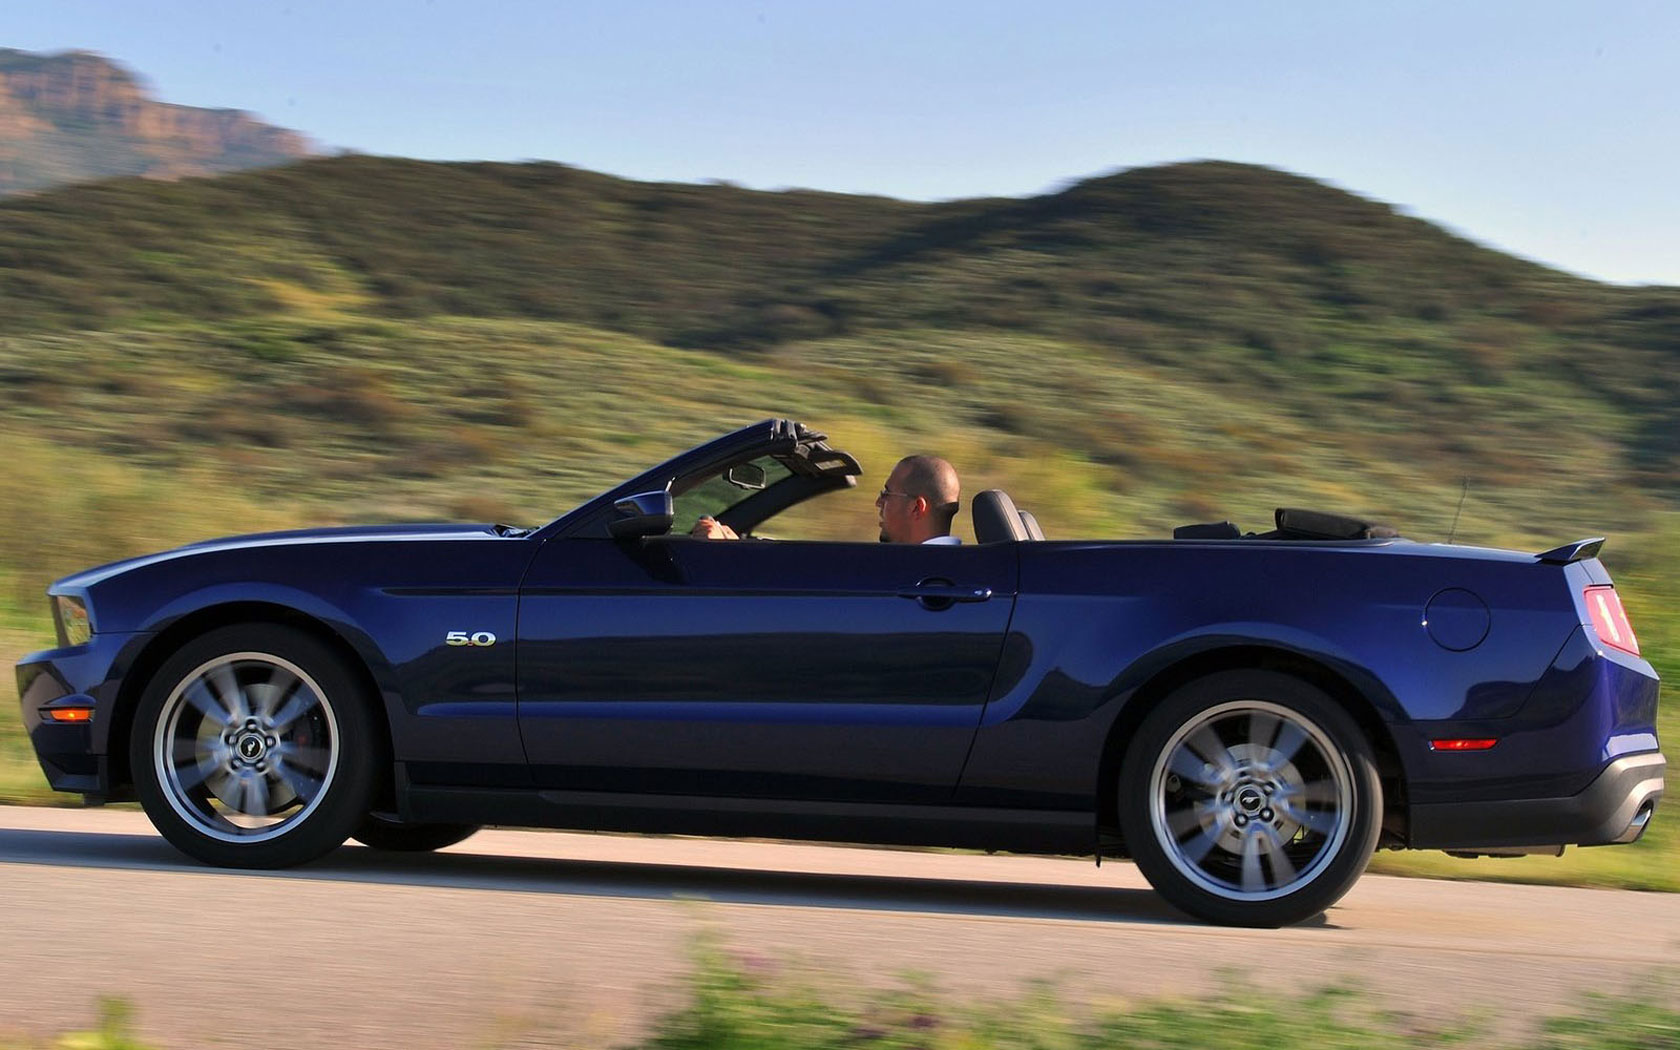  Ford Mustang Convertible (2011-2013)